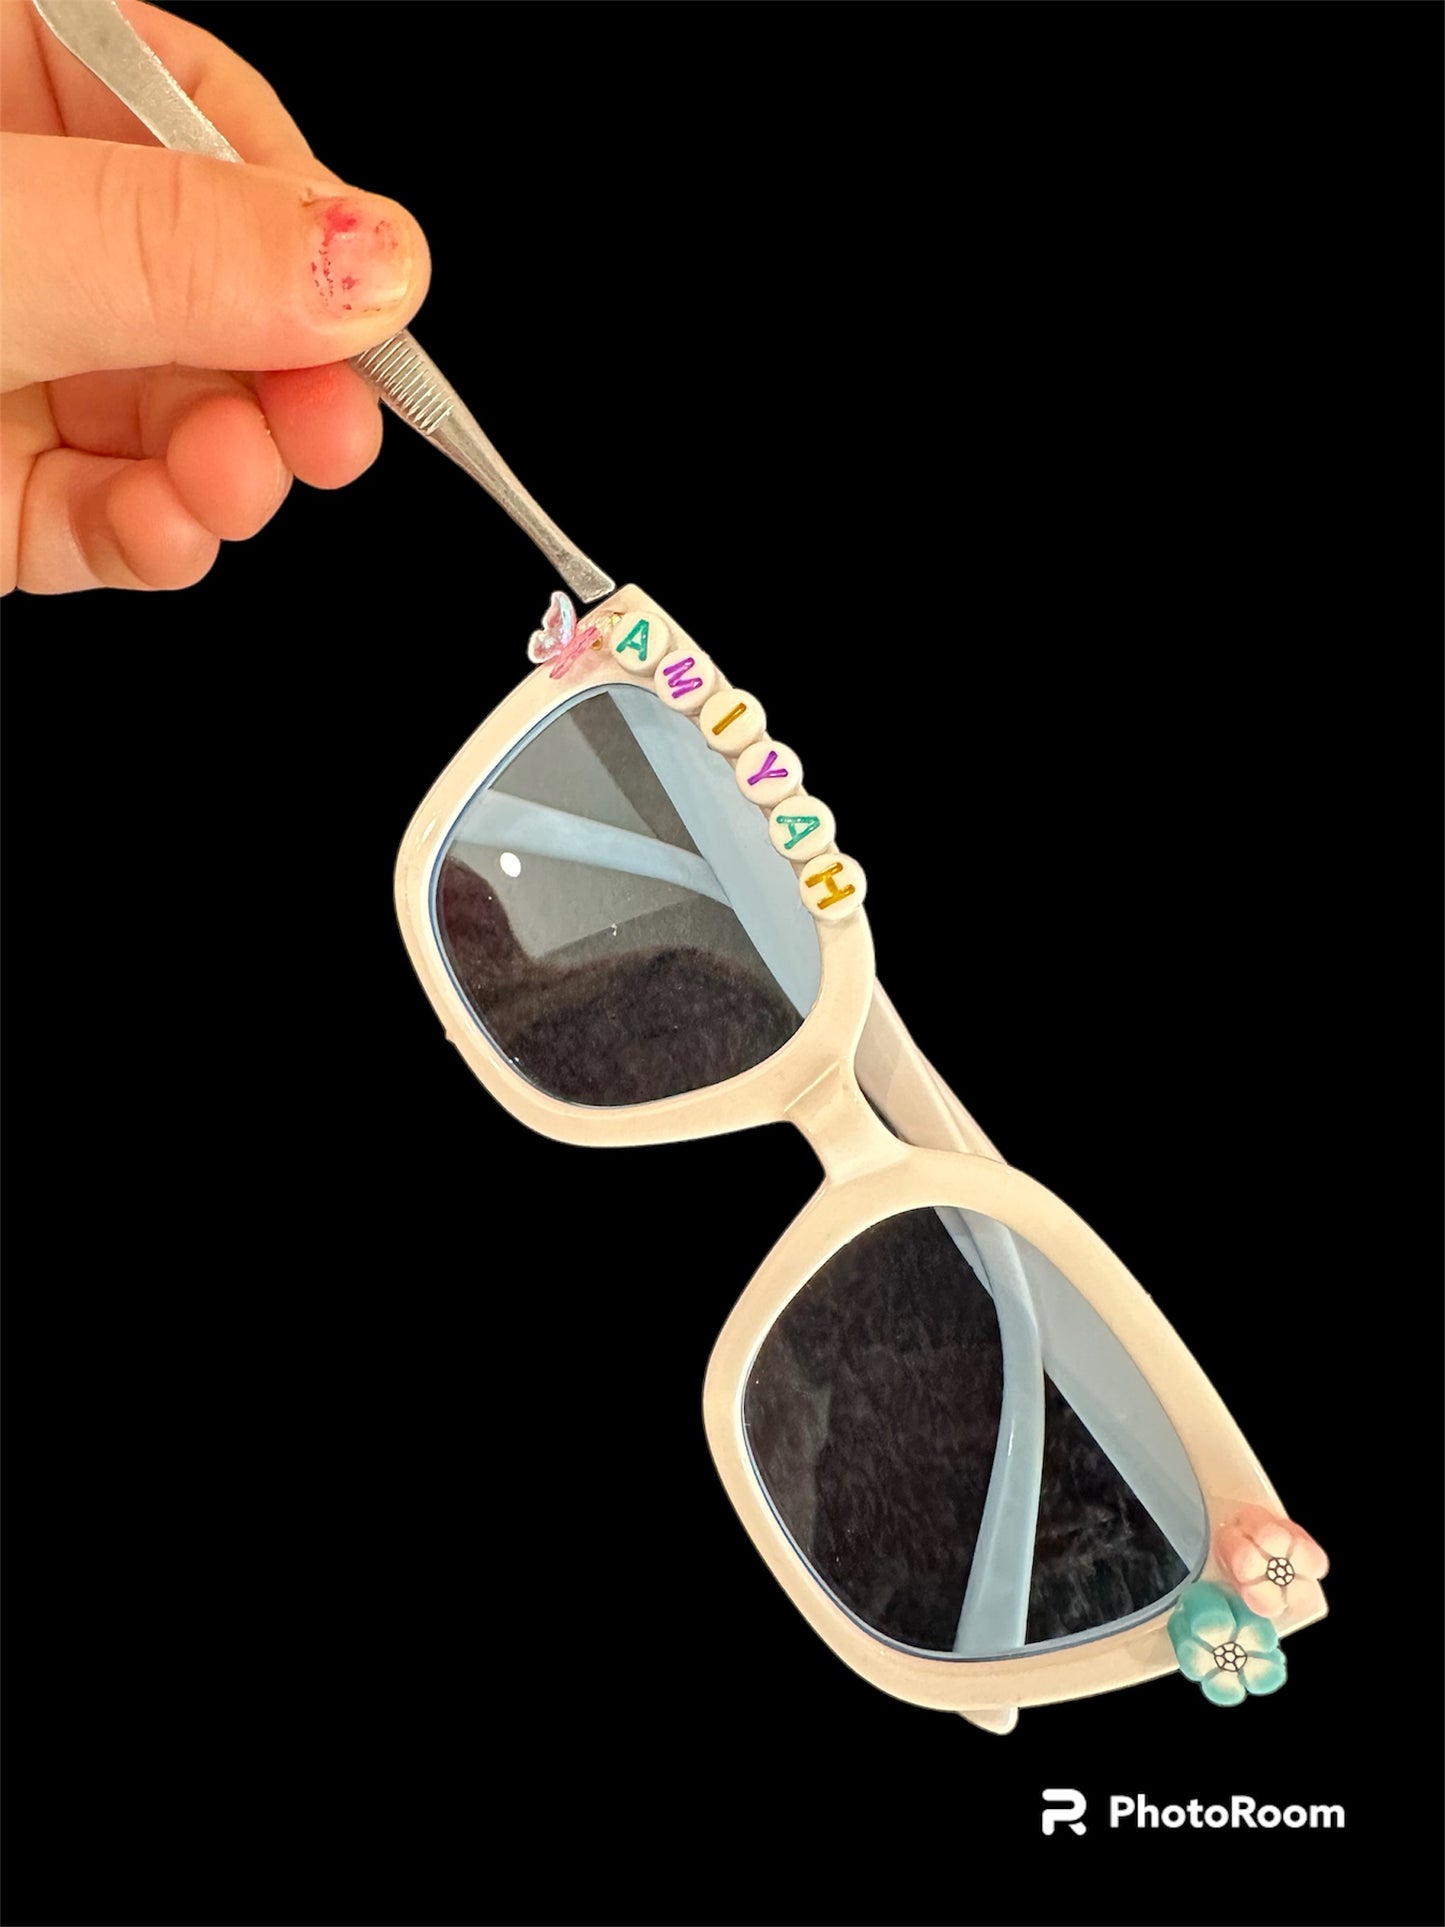 Fun in the Sun Sunglasses Workshop Wednesday, August 7